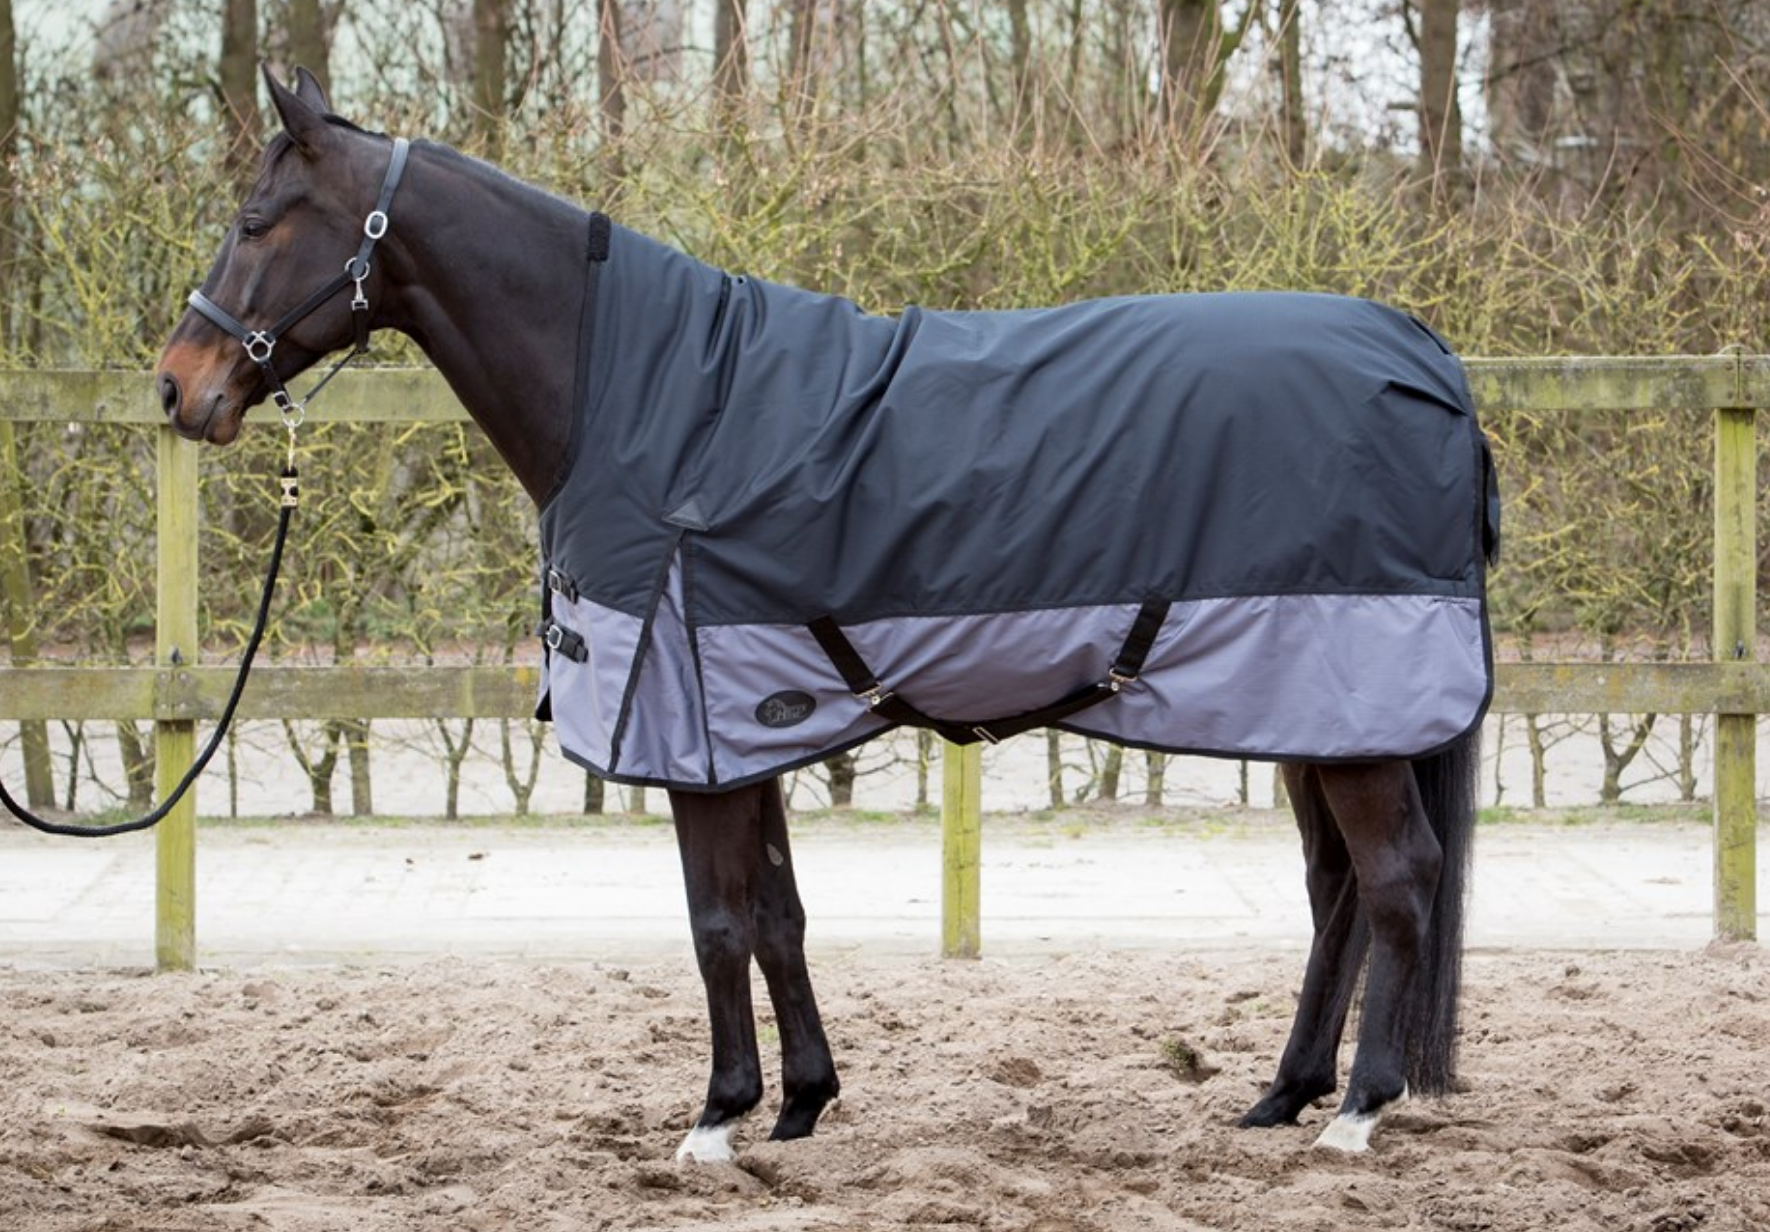 Couverture cheval imperméable Thor 200g highneck, Harry's horse.